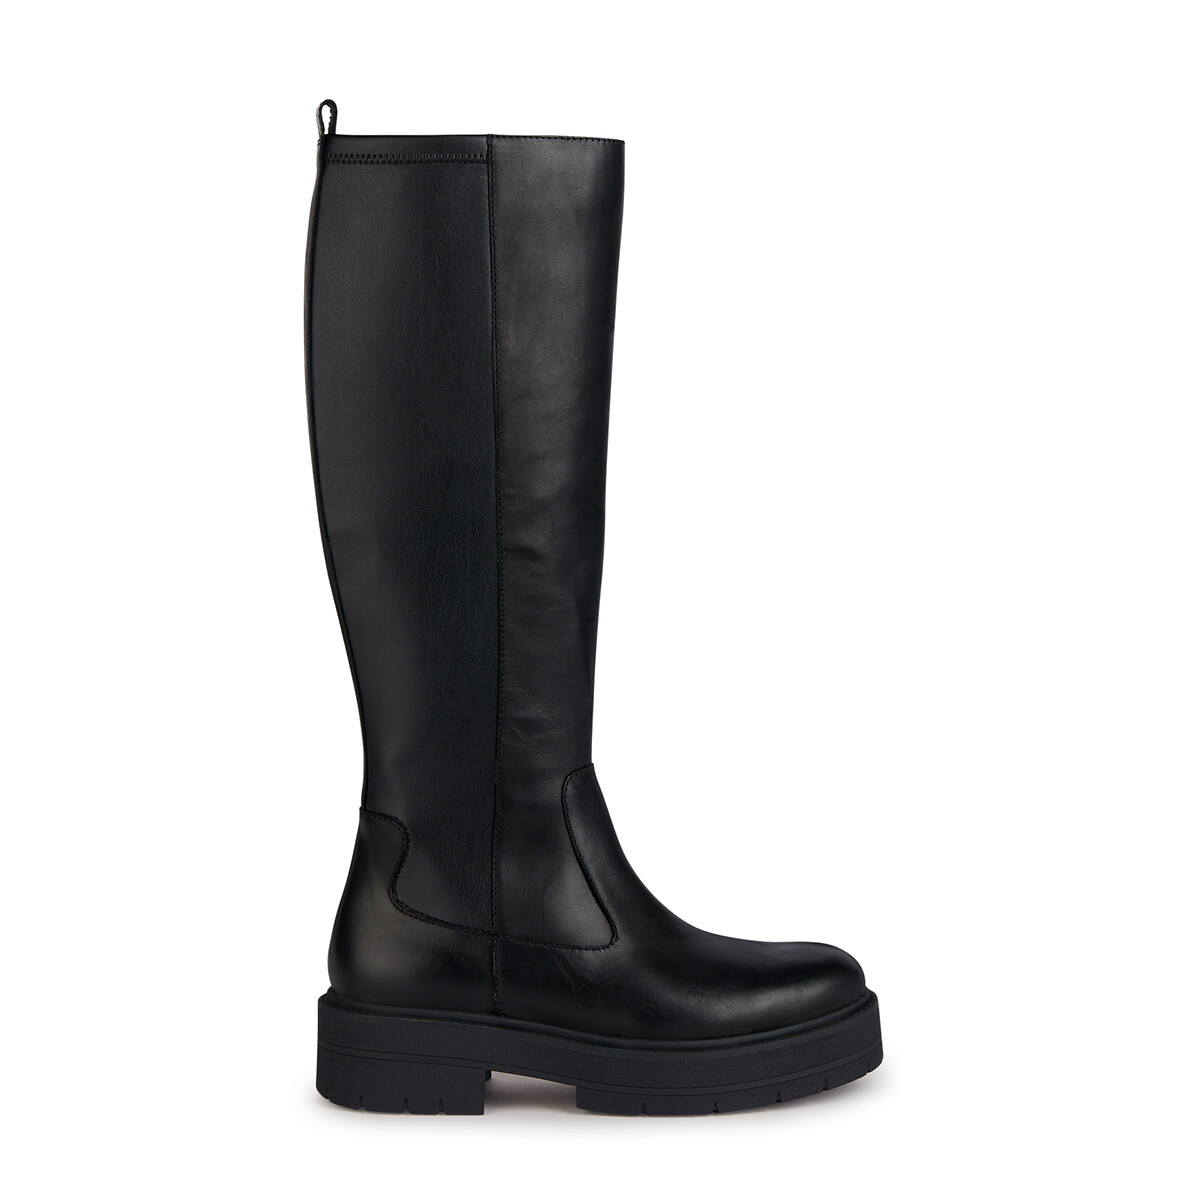 Image of Spherica Breathable Knee-High Boots with Flat Heel in Leather